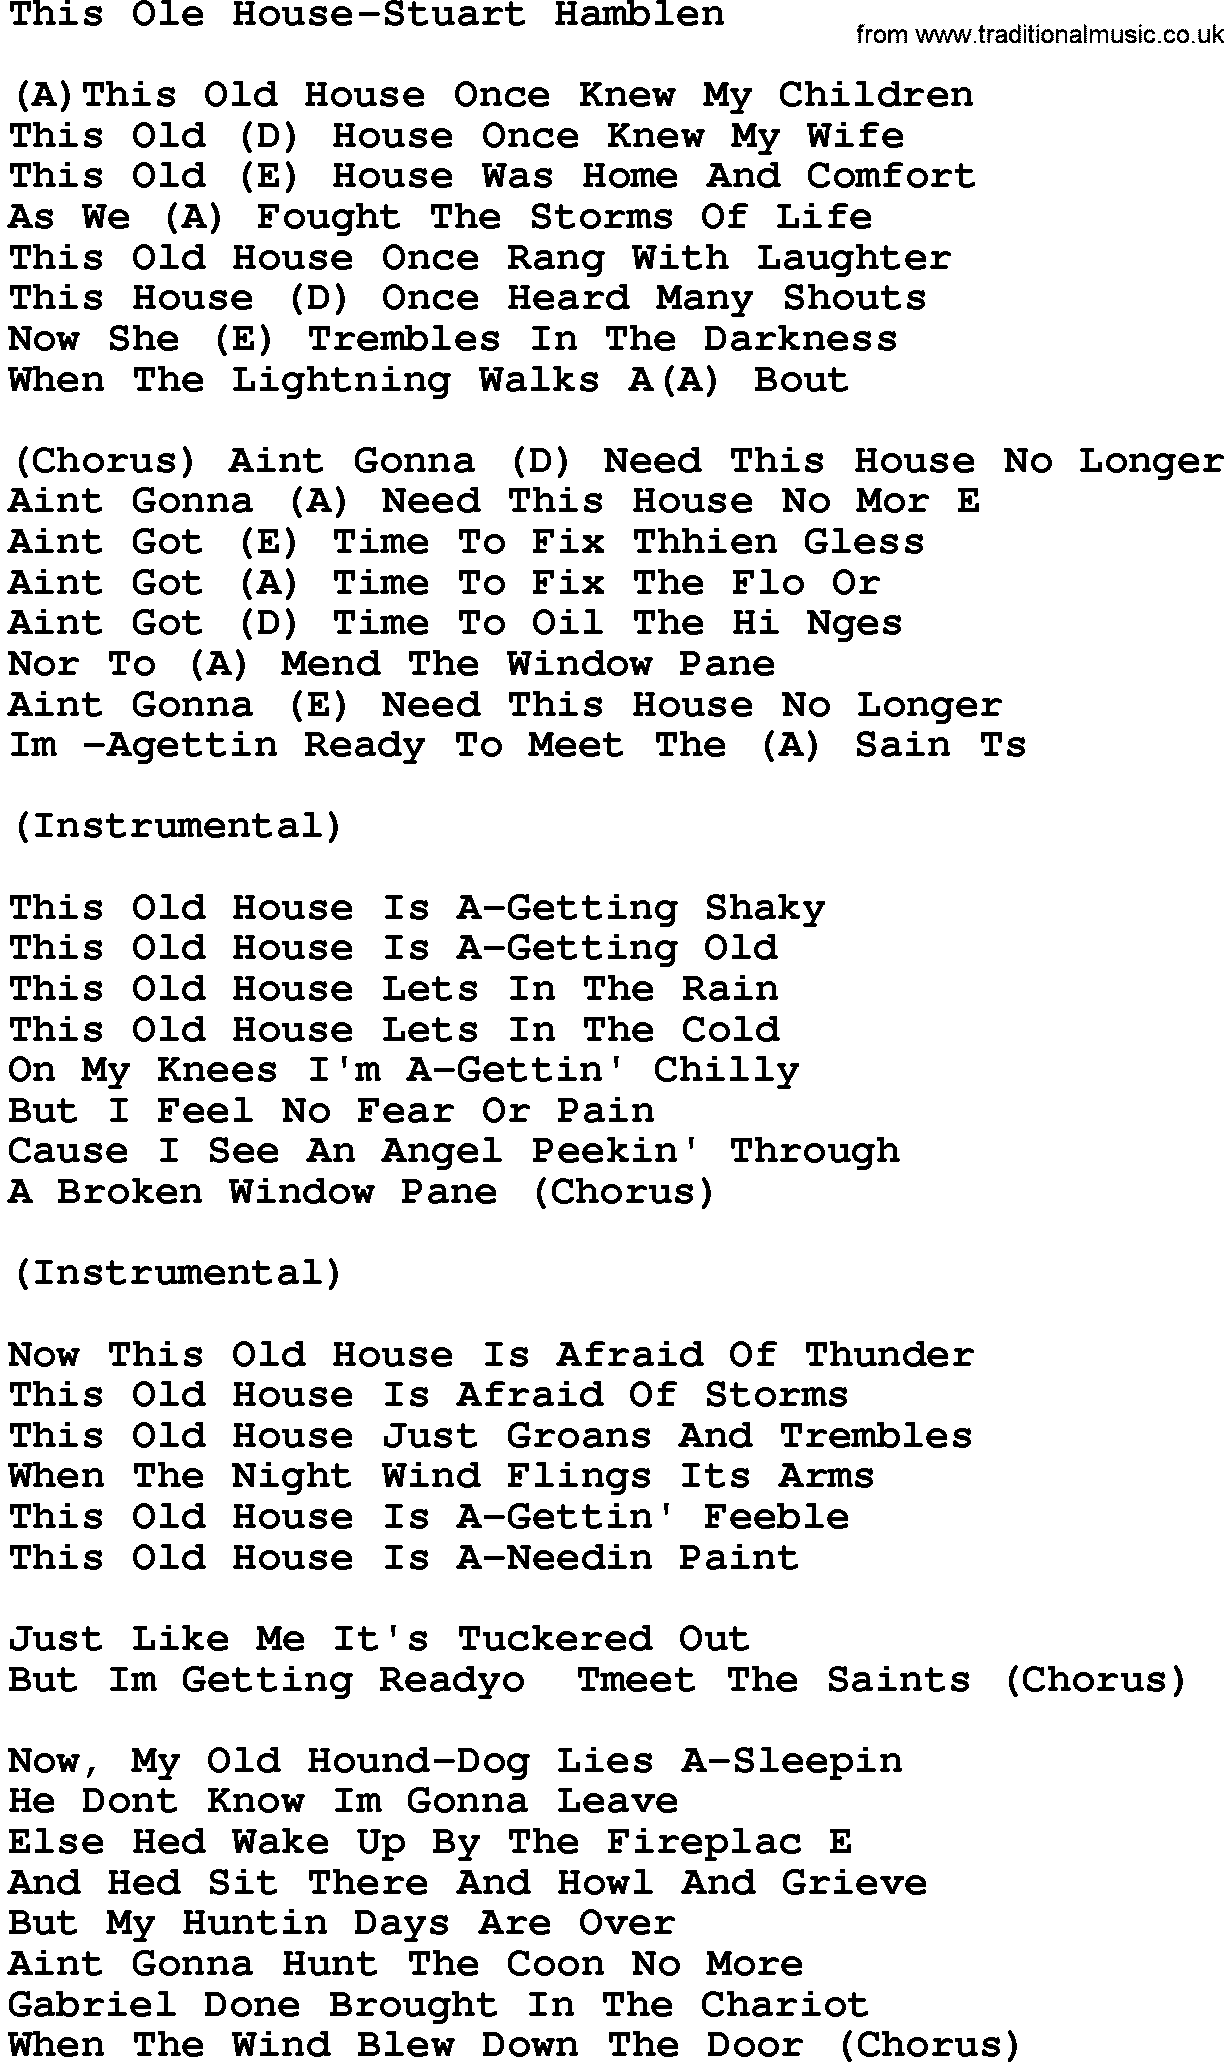 Country music song: This Ole House-Stuart Hamblen lyrics and chords